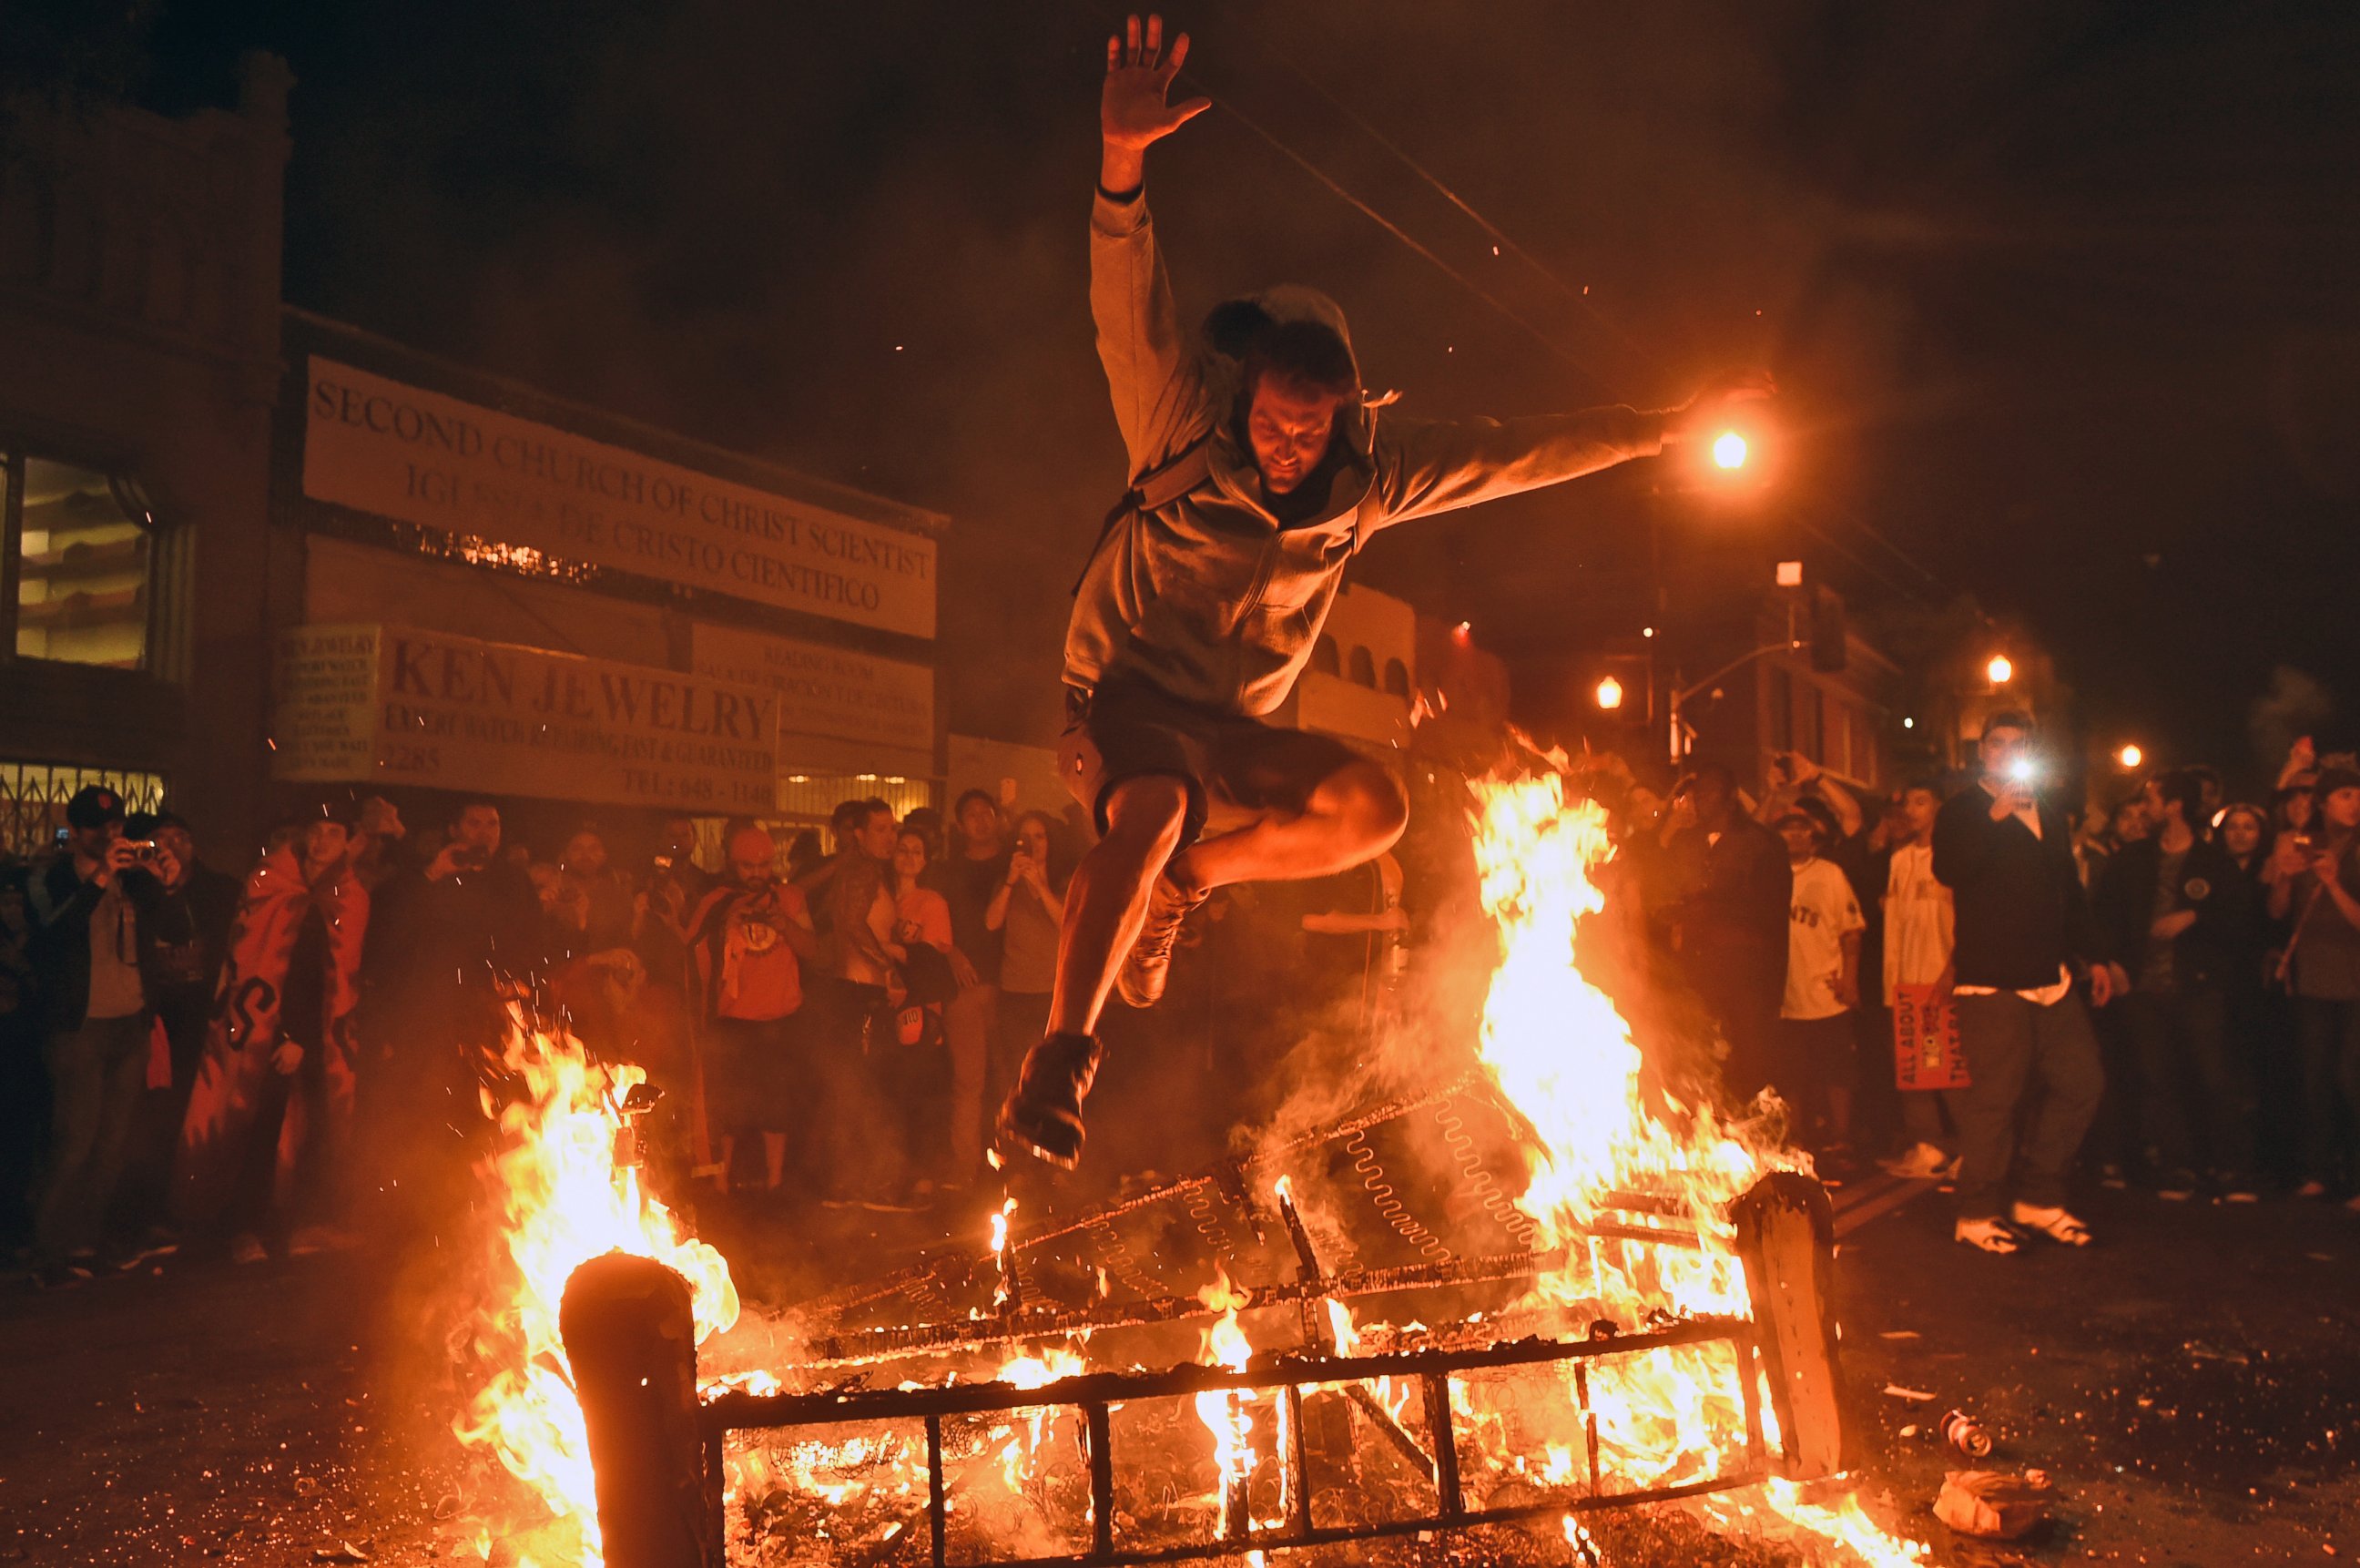 A man jumps over some debris that has been set on fire in the Mission district after the San Francisco Giants beat the Kansas City Royals to win the World Series on Wednesday, Oct. 29, 2014, in San Francisco.